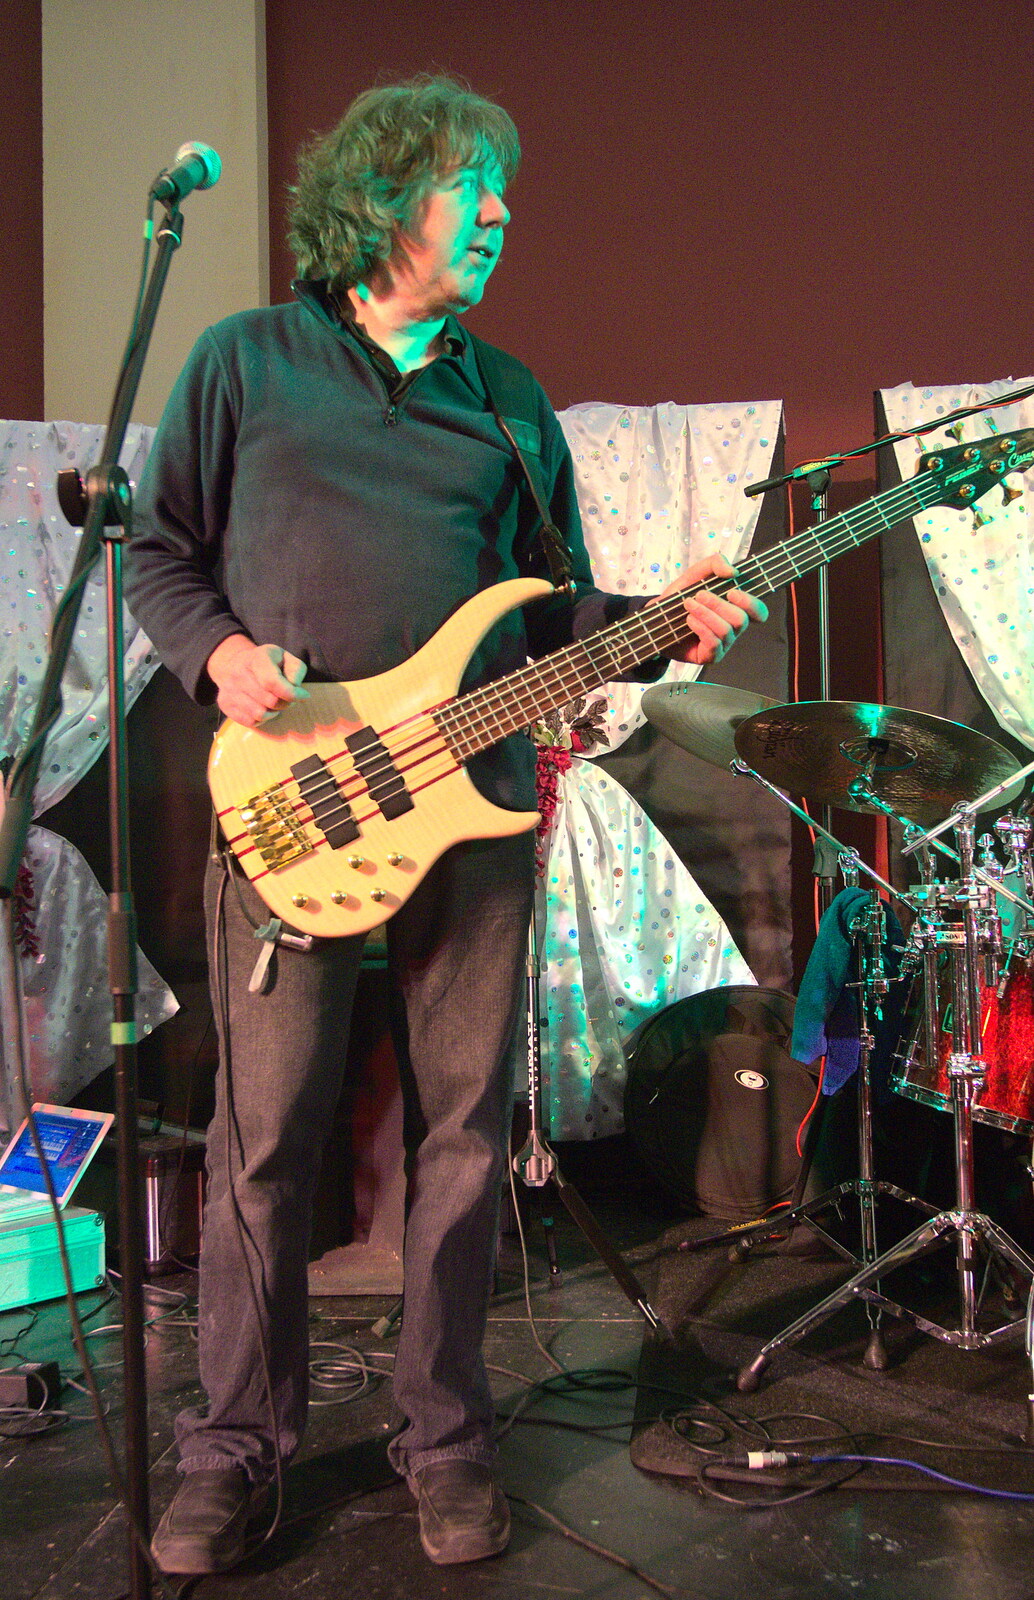 Max and his five-string bass from The BBs at The Cornhall, Diss, Norfolk - 31st January 2013